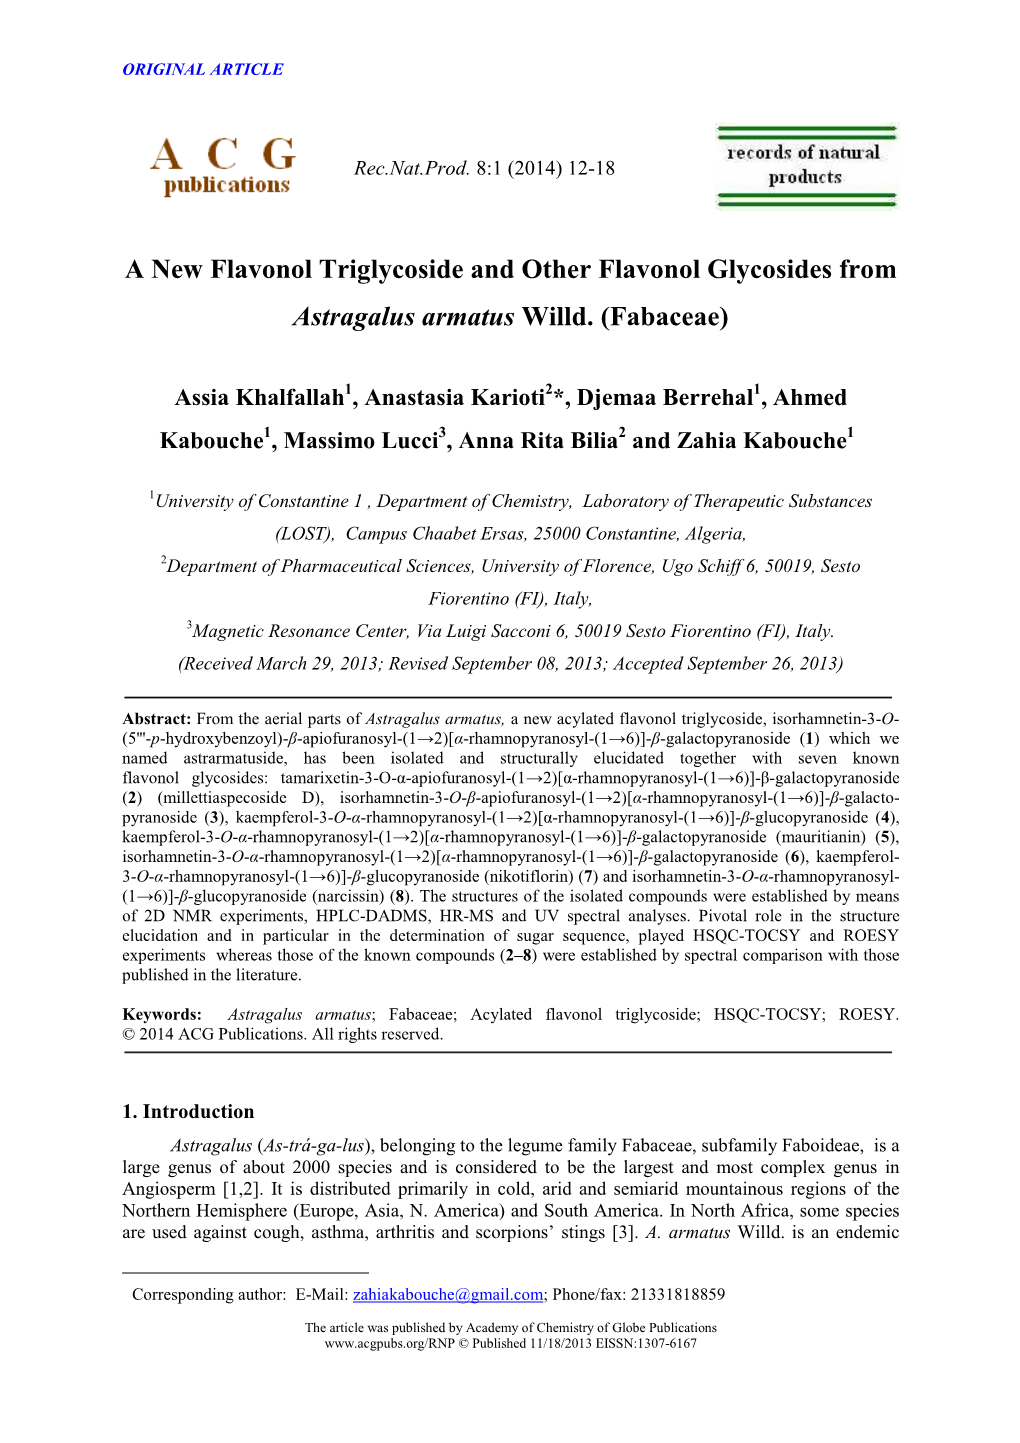 A New Flavonol Triglycoside and Other Flavonol Glycosides from Astragalus Armatus Willd